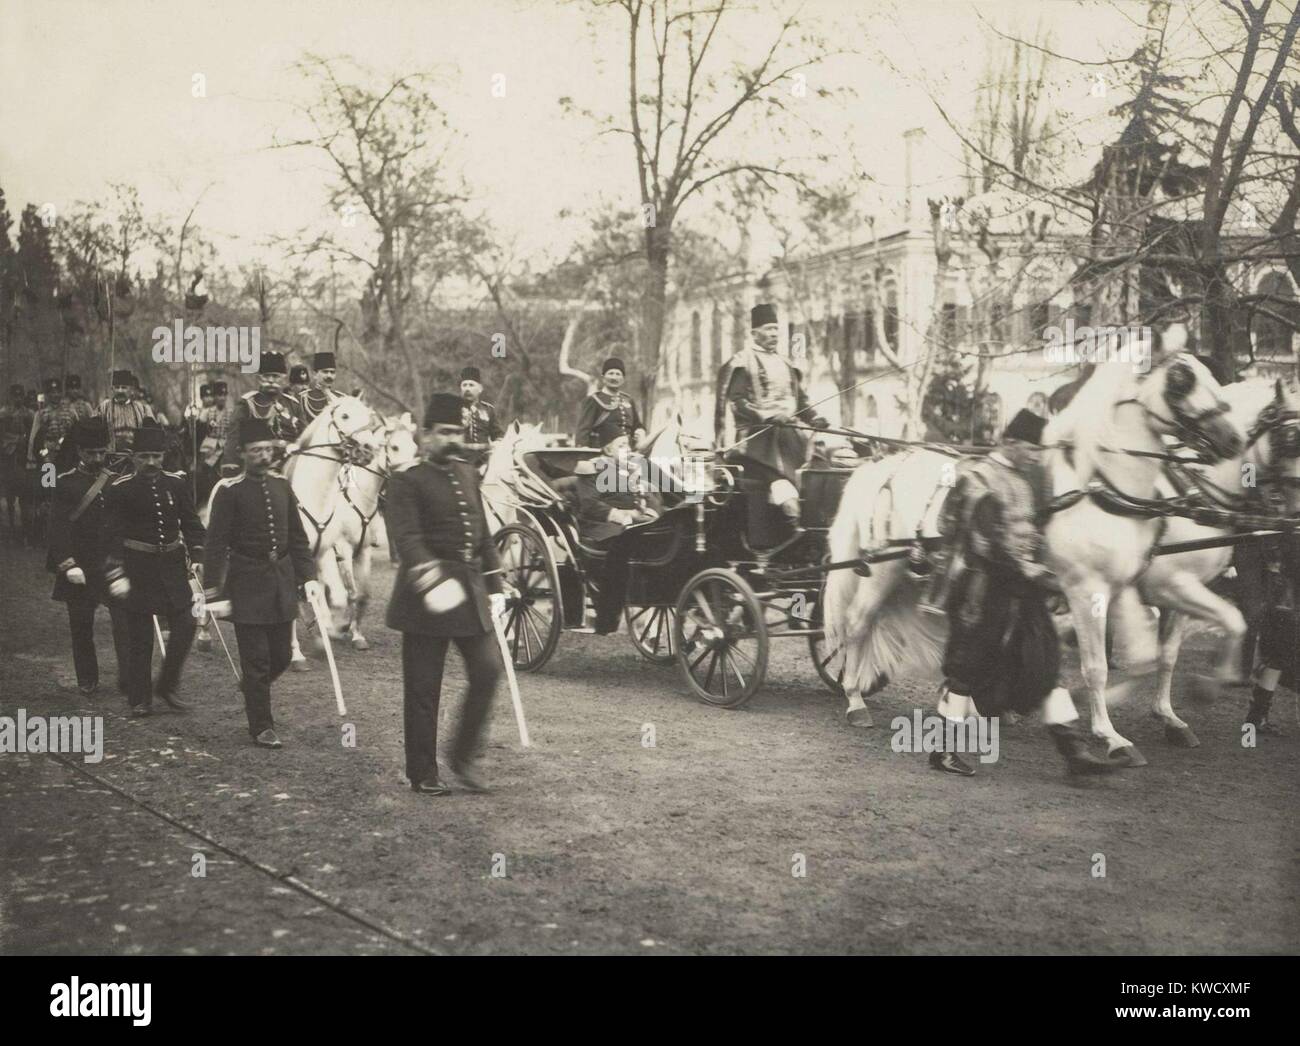 Ottoman Sultan Mehmed V in a carriage followed by the Young Turk Enver Pasha on white horse. Mehmed V, who reigned from Apr. 27, 1909 to July 3, 1918, was installed when the young Turks deposed his the less pliant brother, Sultan Abdul Hamid II (BSLOC 2017 1 103) Stock Photo